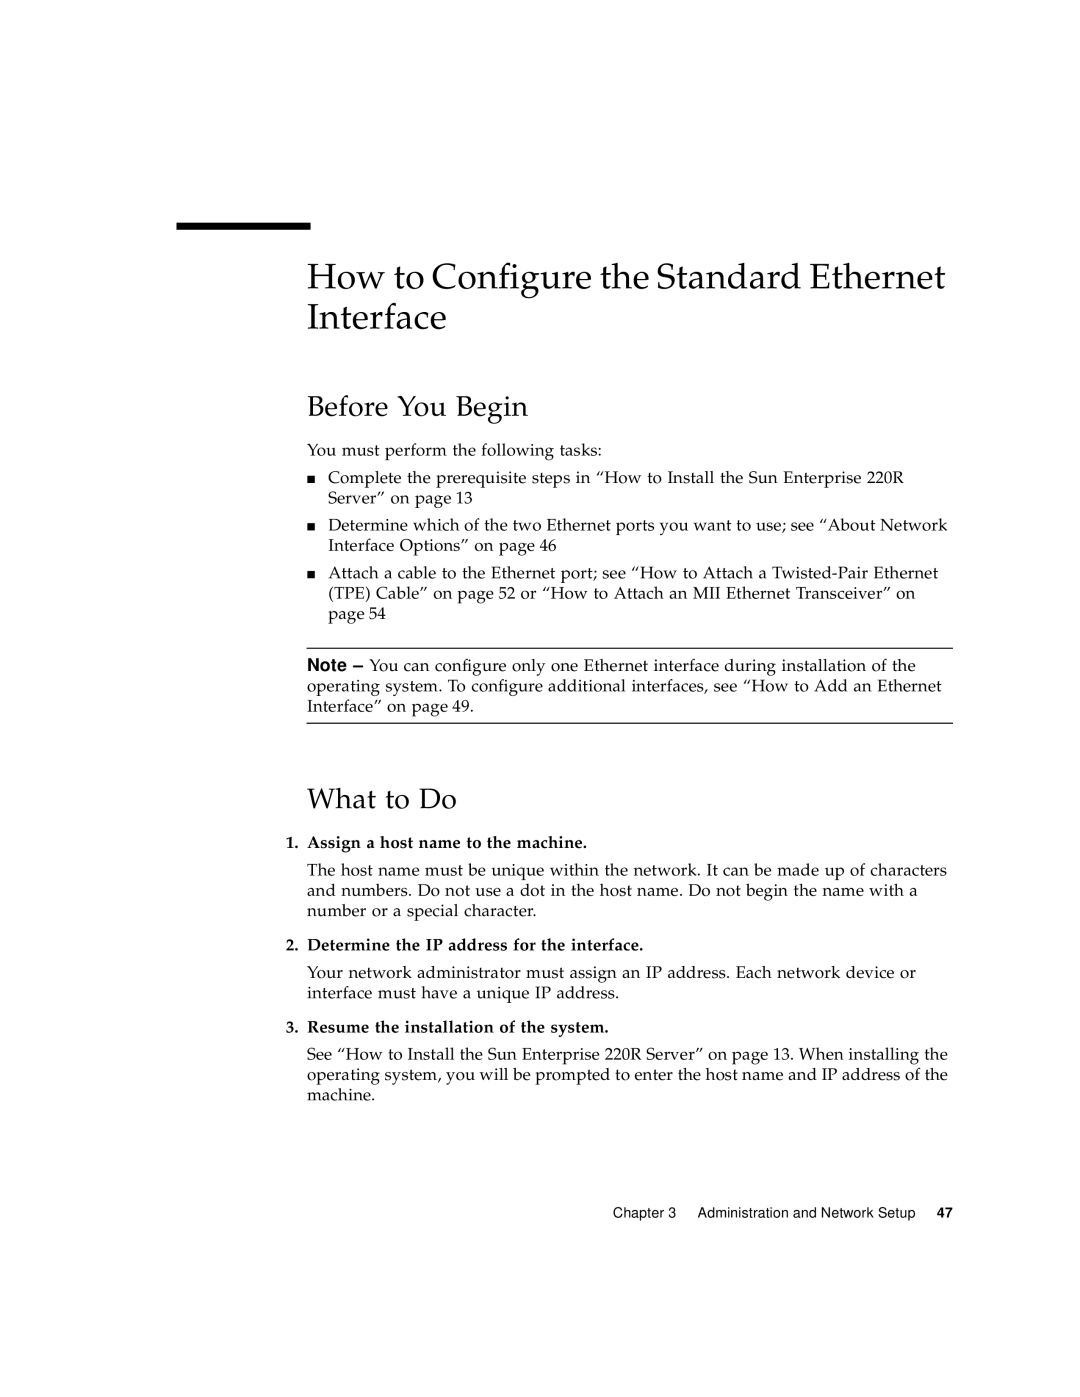 Sun Microsystems 220R How to Configure the Standard Ethernet Interface, Assign a host name to the machine, What to Do 